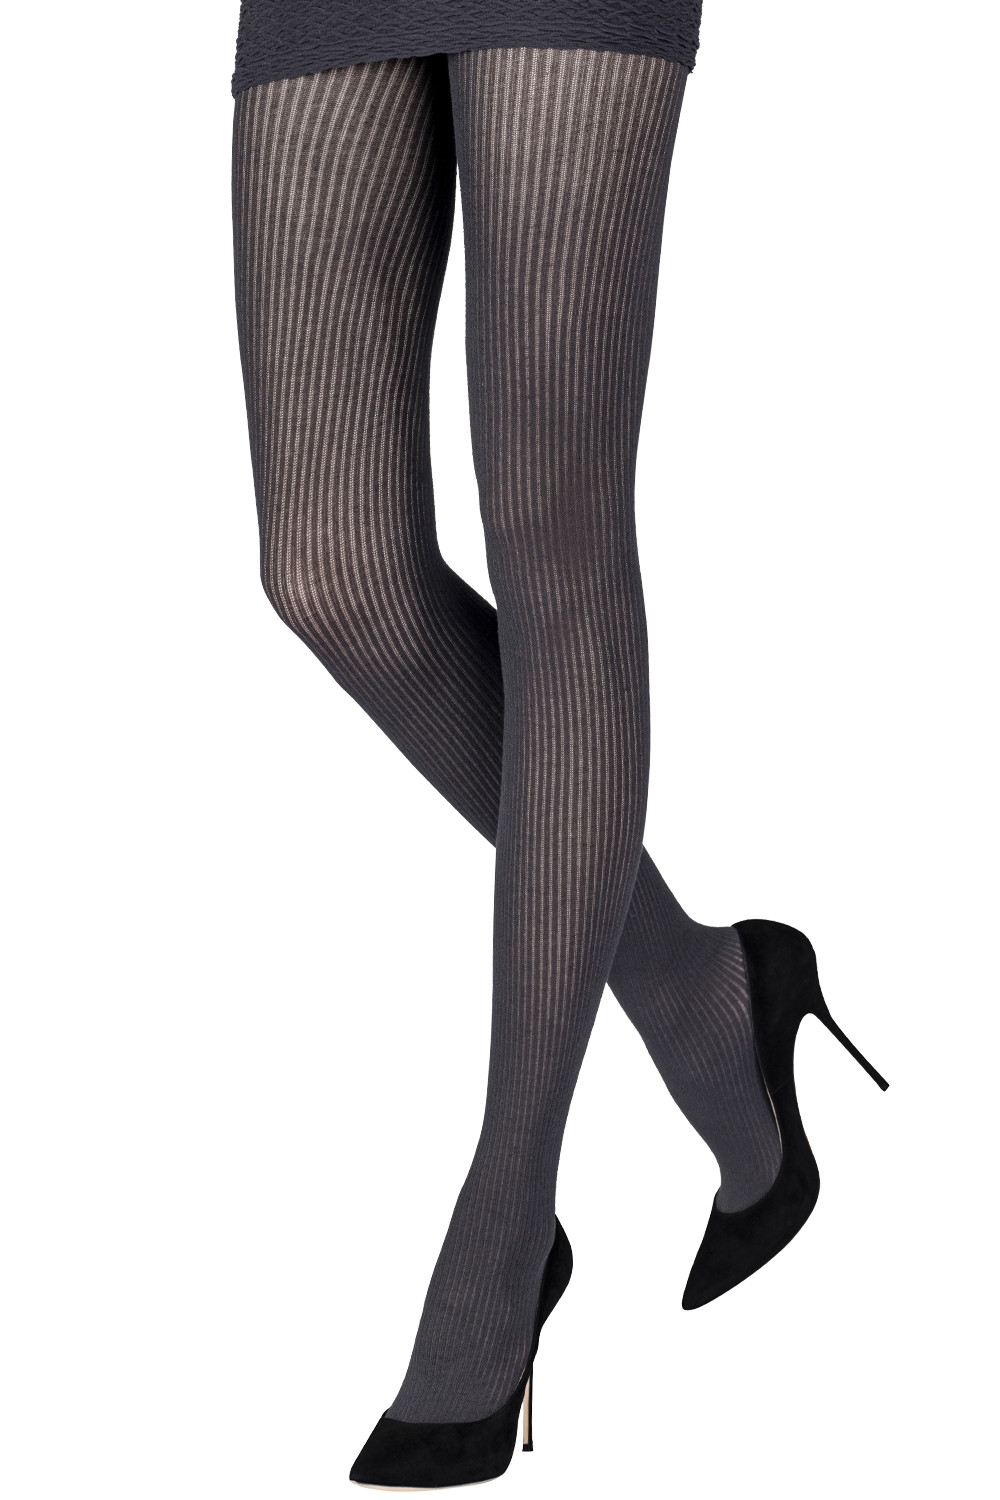 File:Sheer tights or pantyhose in caucasian skin and black colour